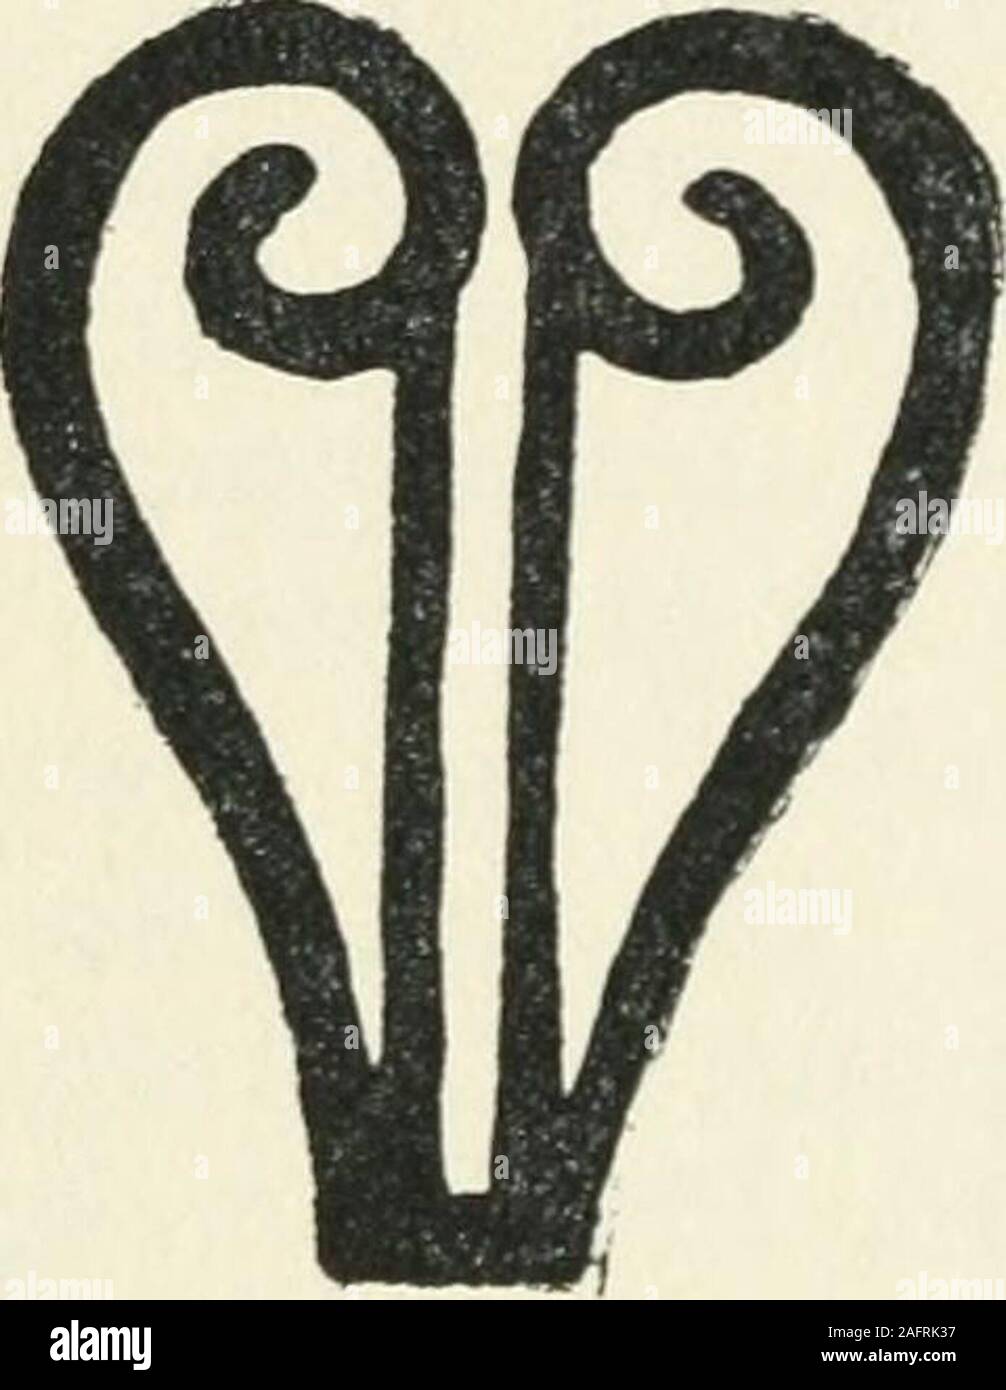 . The pagan tribes of Borneo; a description of their physical, moral and intellectual condition, with some discussion of their ethnic relations. ous modification ofthis eye is seen in another Sea Dayak scorpion designfigured by E. B. Haddon [4, Fig. 19]. Furness [3, p. 142]figures a couple of scorpion designs, but neither are quiteas debased as that which we figure here. Furness alsofigures a scroll design, not unlike a Bakatan design, tatuedon the forearm, and termed taia gasieng^ the thread of thespinning wheel; a similar one figured by Ling Roth [7, 1 Mr. E. B. Haddon (4, p. 124) writes : * Stock Photo